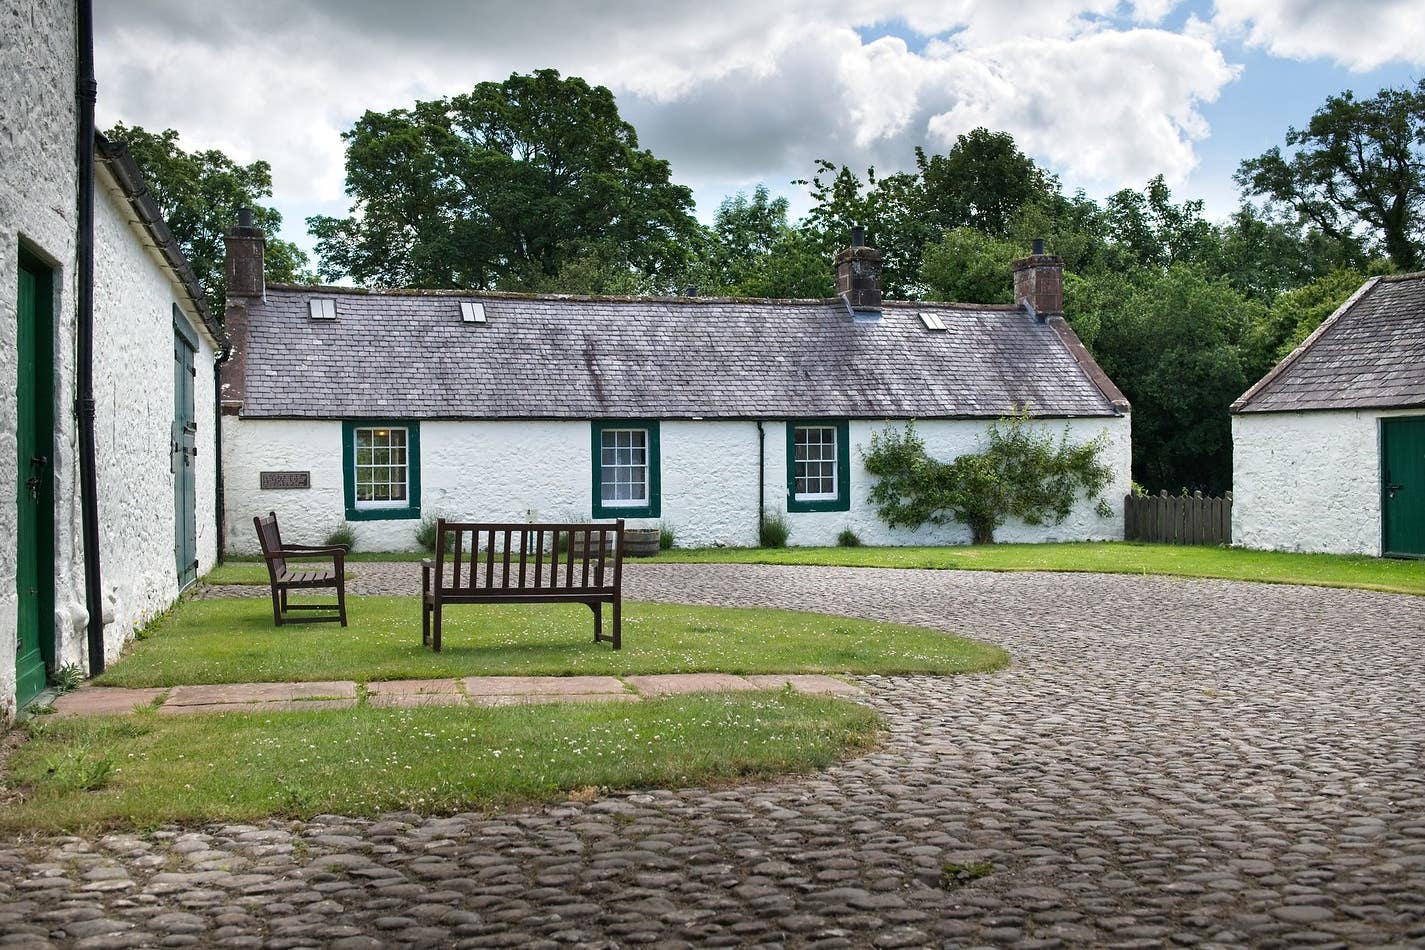 Plans have been drawn up to transform the farm built by Robert Burns where he wrote some of his most famous works (Robert Burns Ellisland Trust/PA)